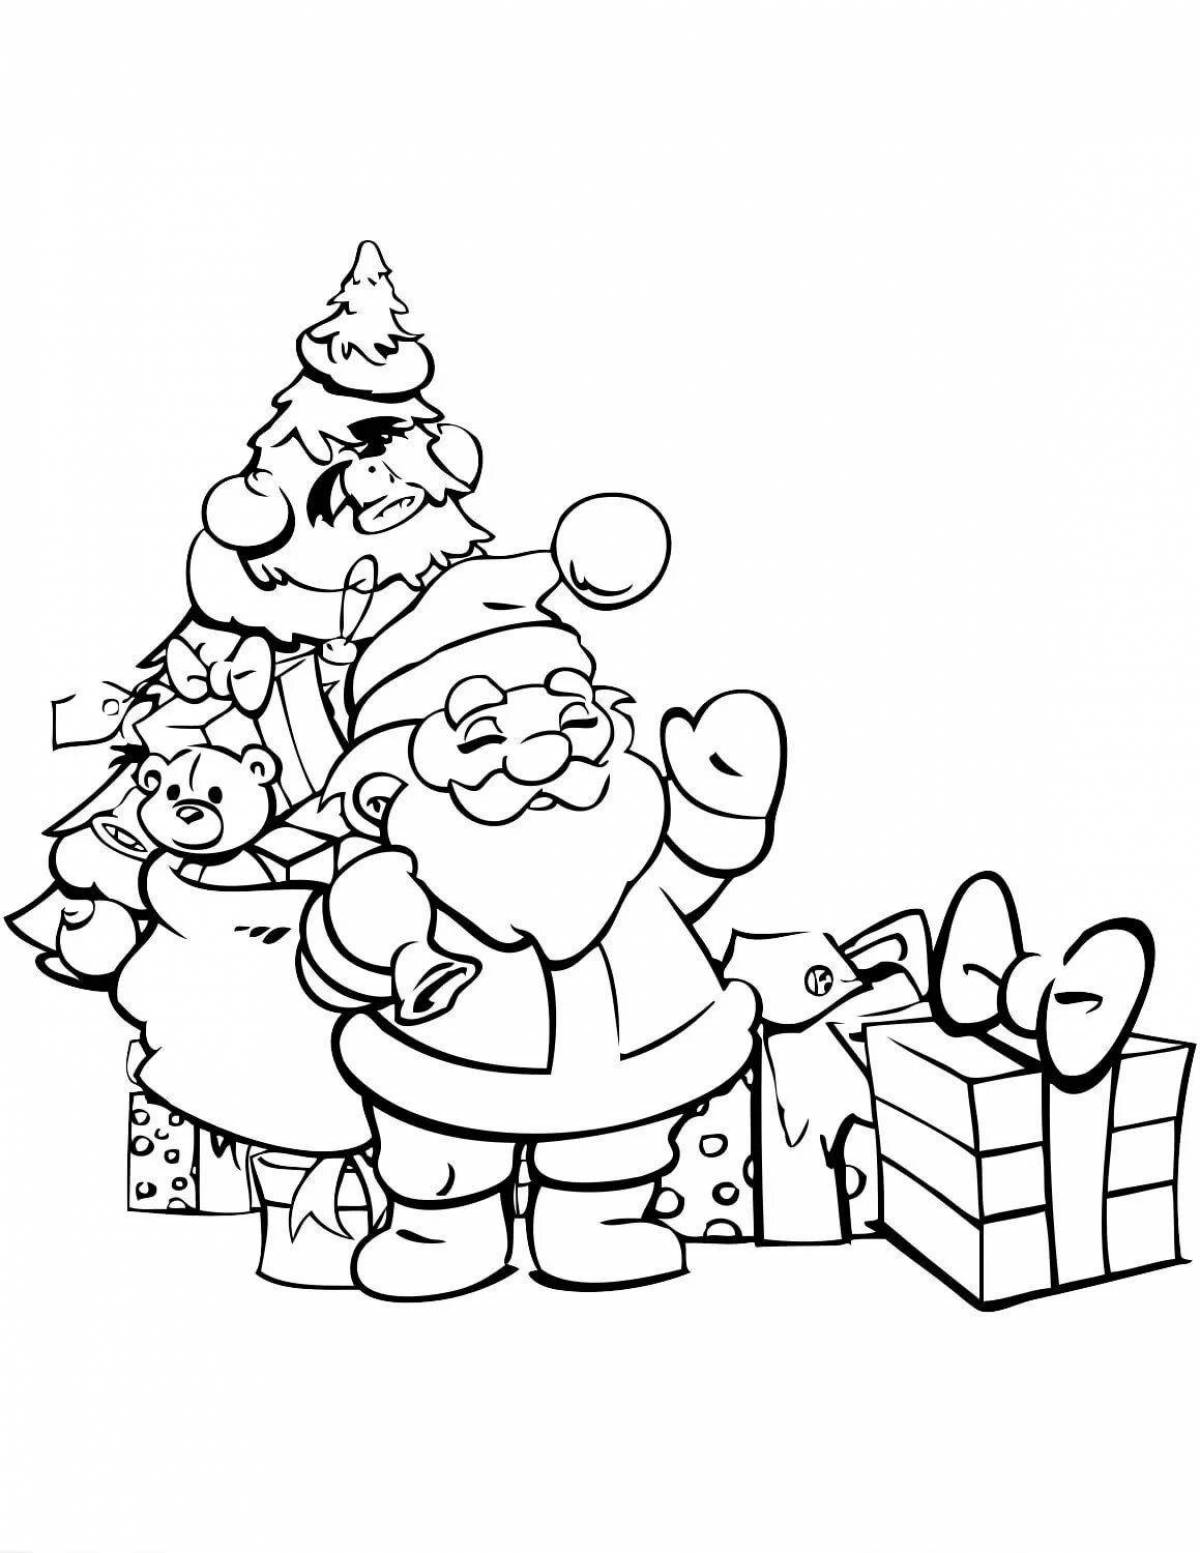 Exciting coloring little santa claus